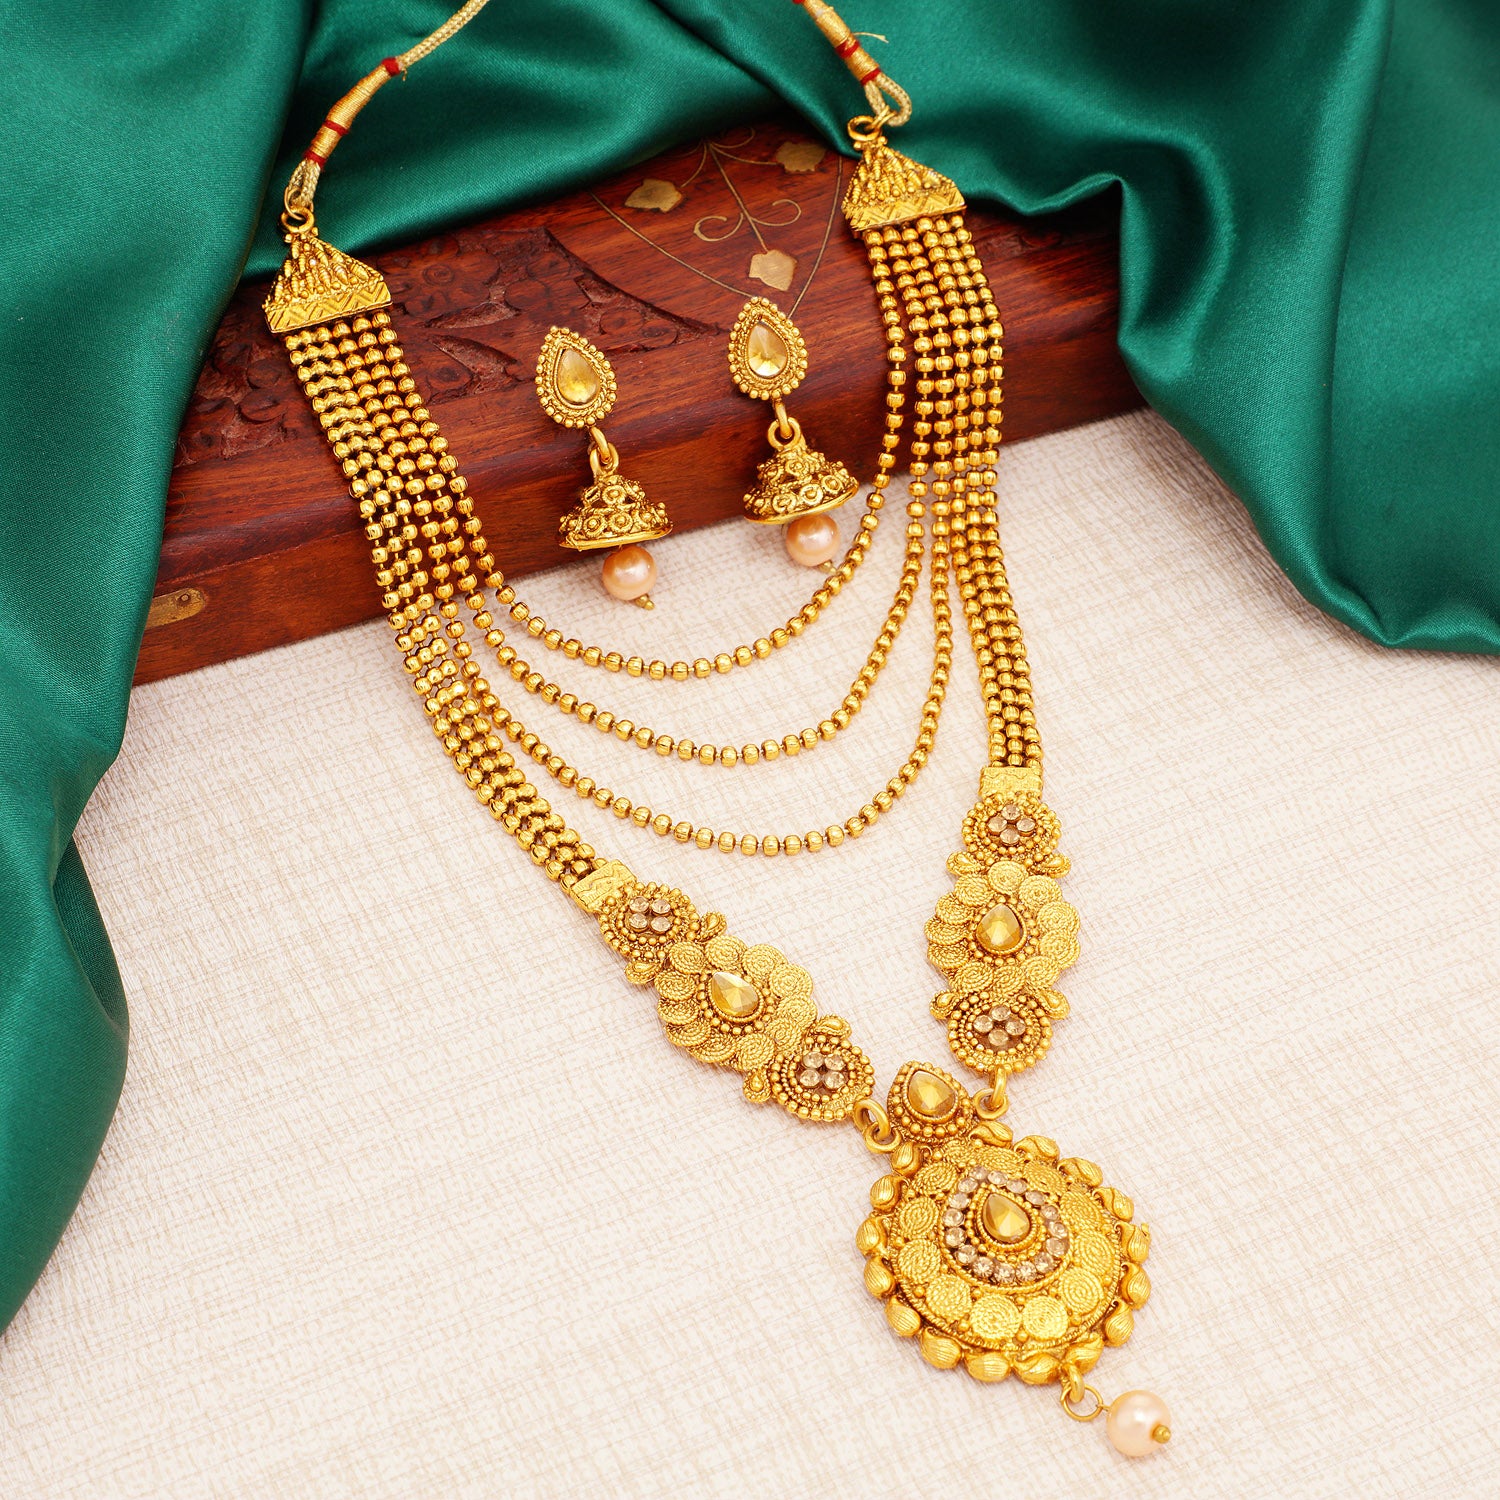 Buy Long Chain Lifetime Guarantee Gold Plated Jewelry India